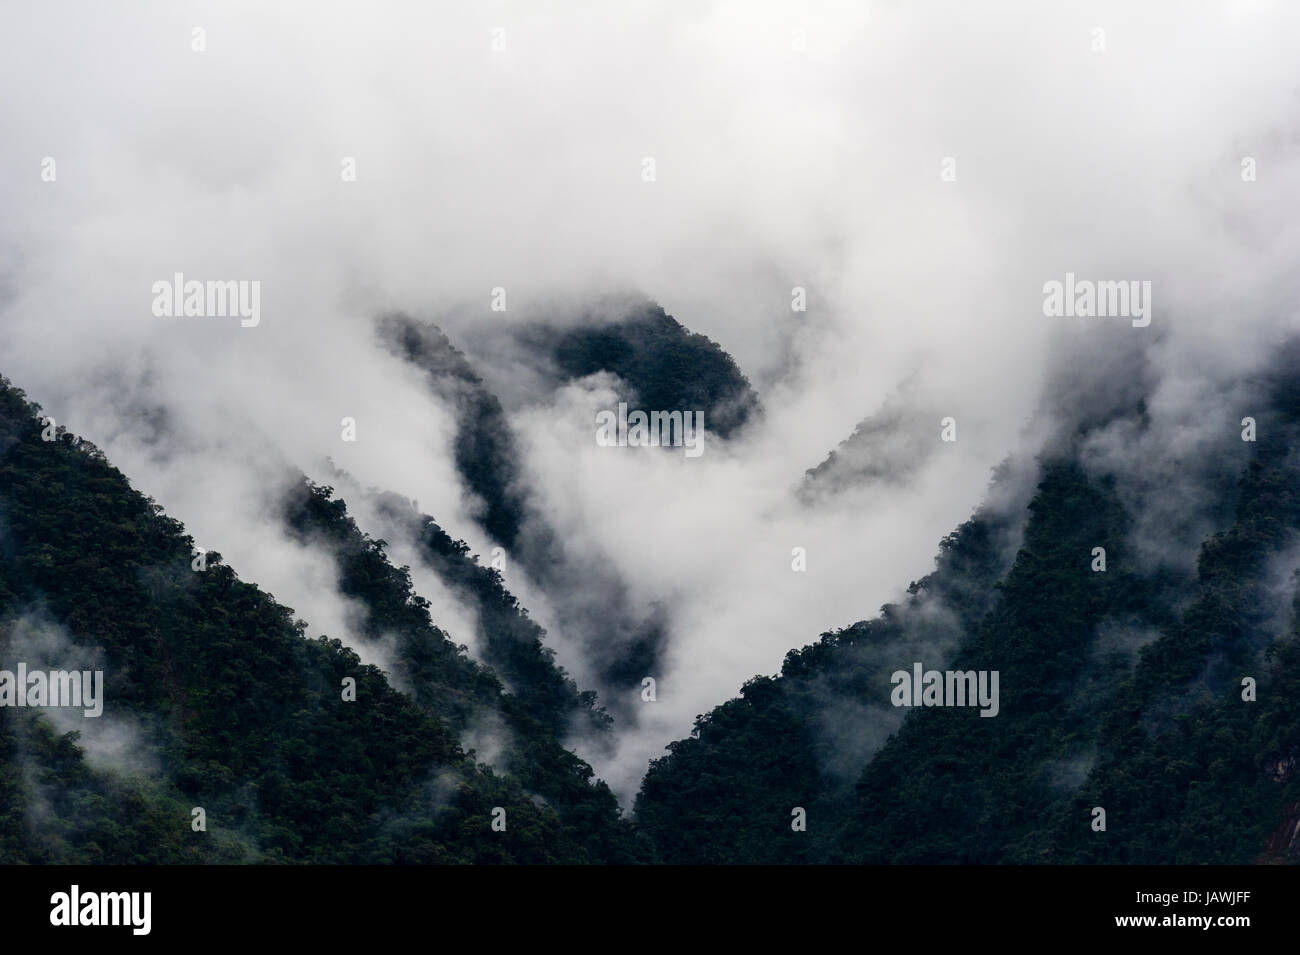 Storm clouds engulf the steep forested slopes and jagged mountain peaks of the Andes. Stock Photo